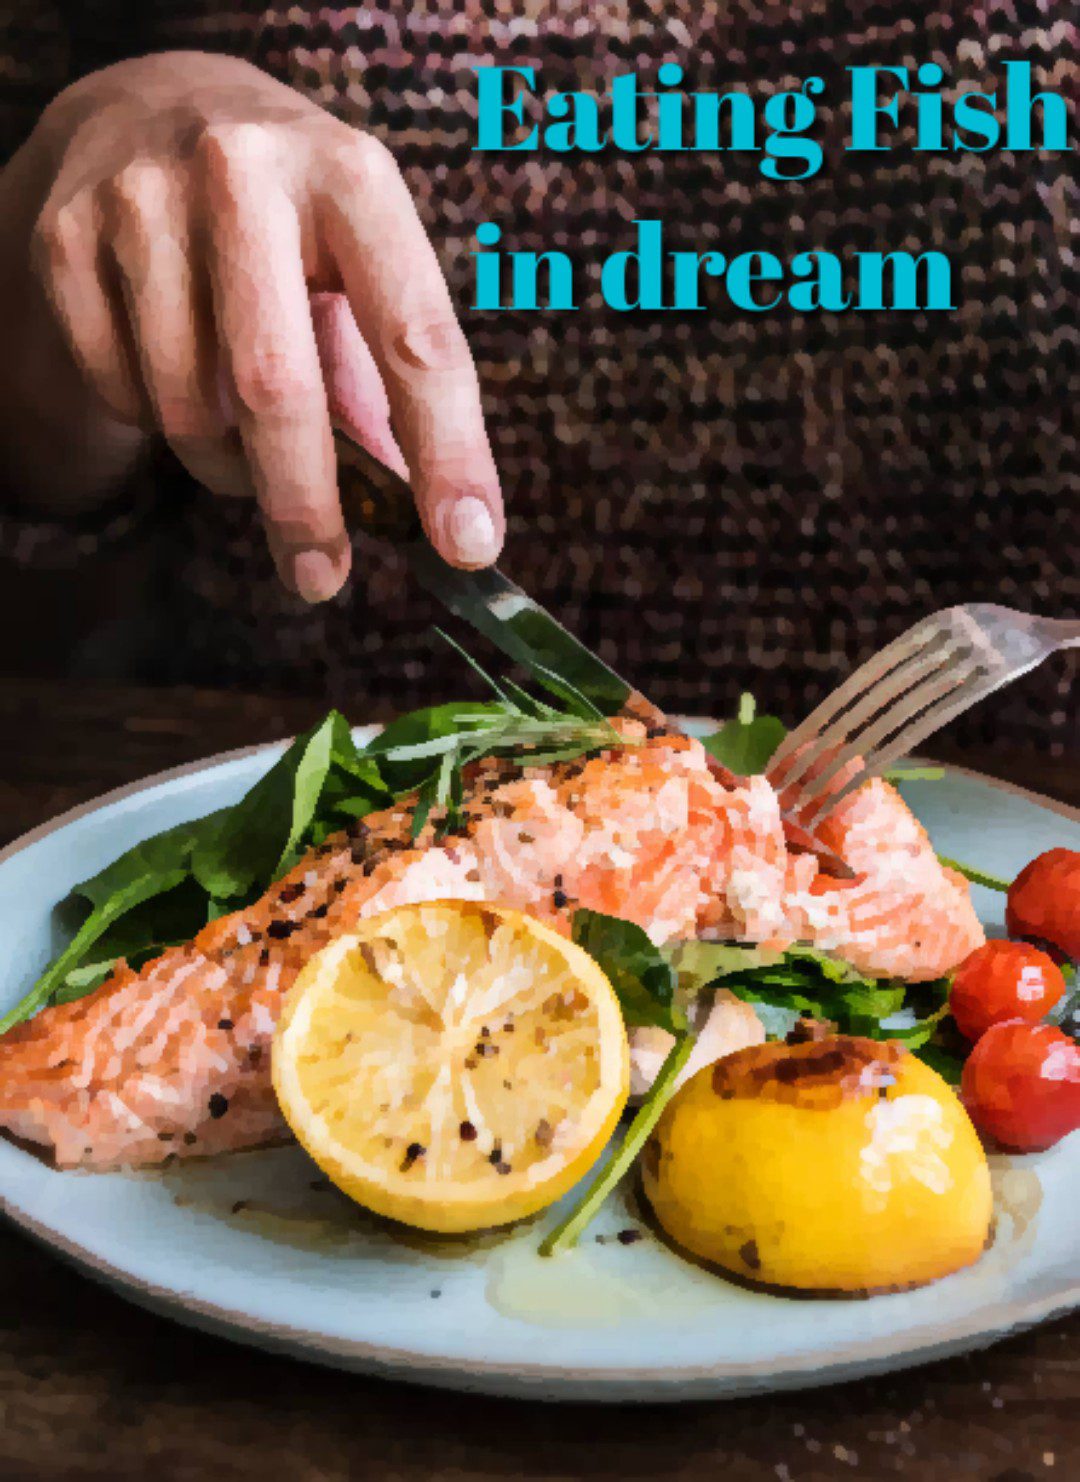 Biblical Meaning of Eating Fish in Dream